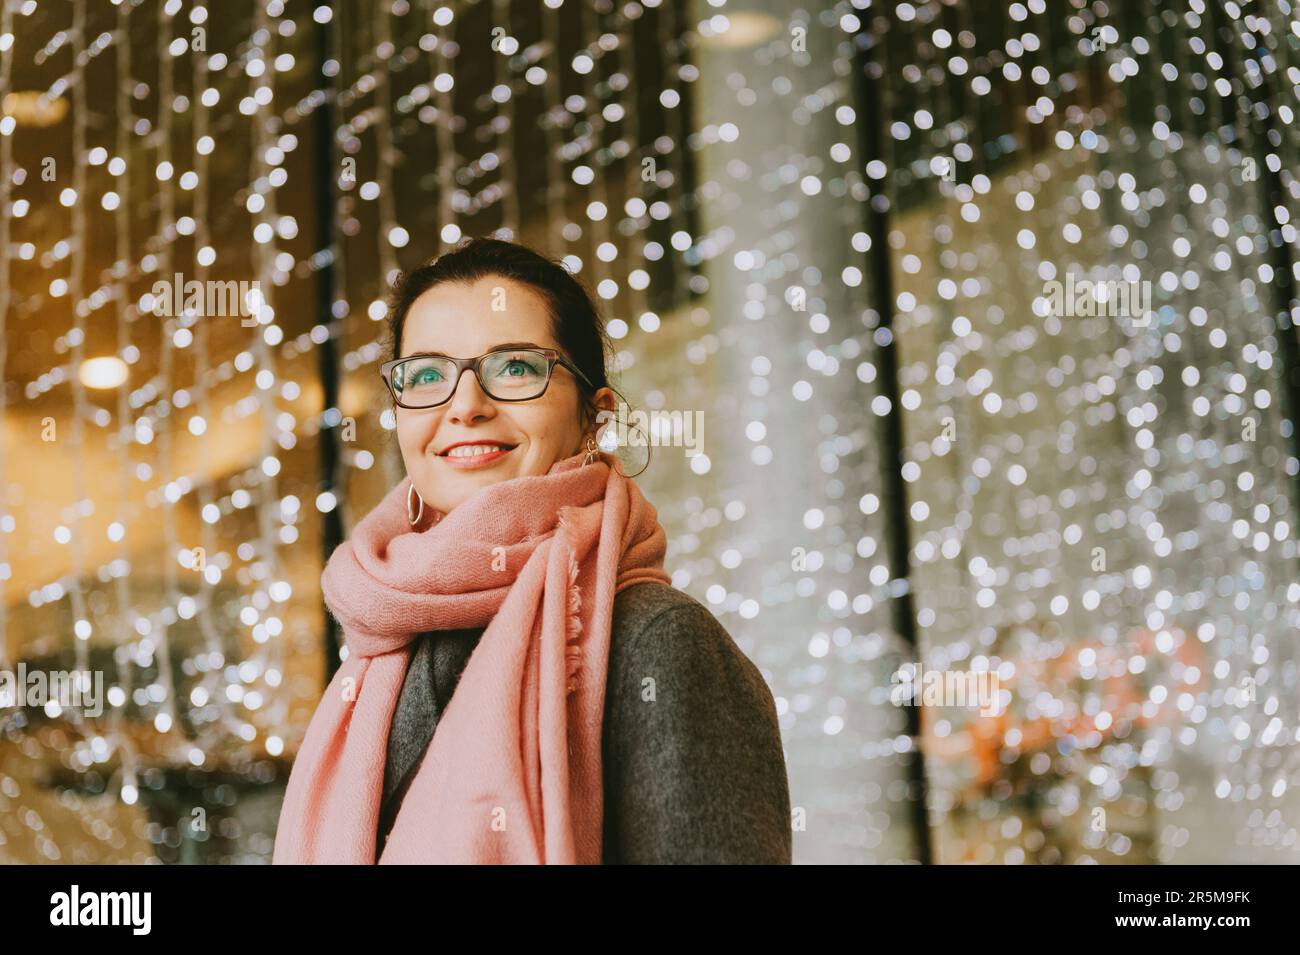 Outdoor portrait of beautiful woman posing ina city with many lights on background, wearing glasses and pink scarf Stock Photo